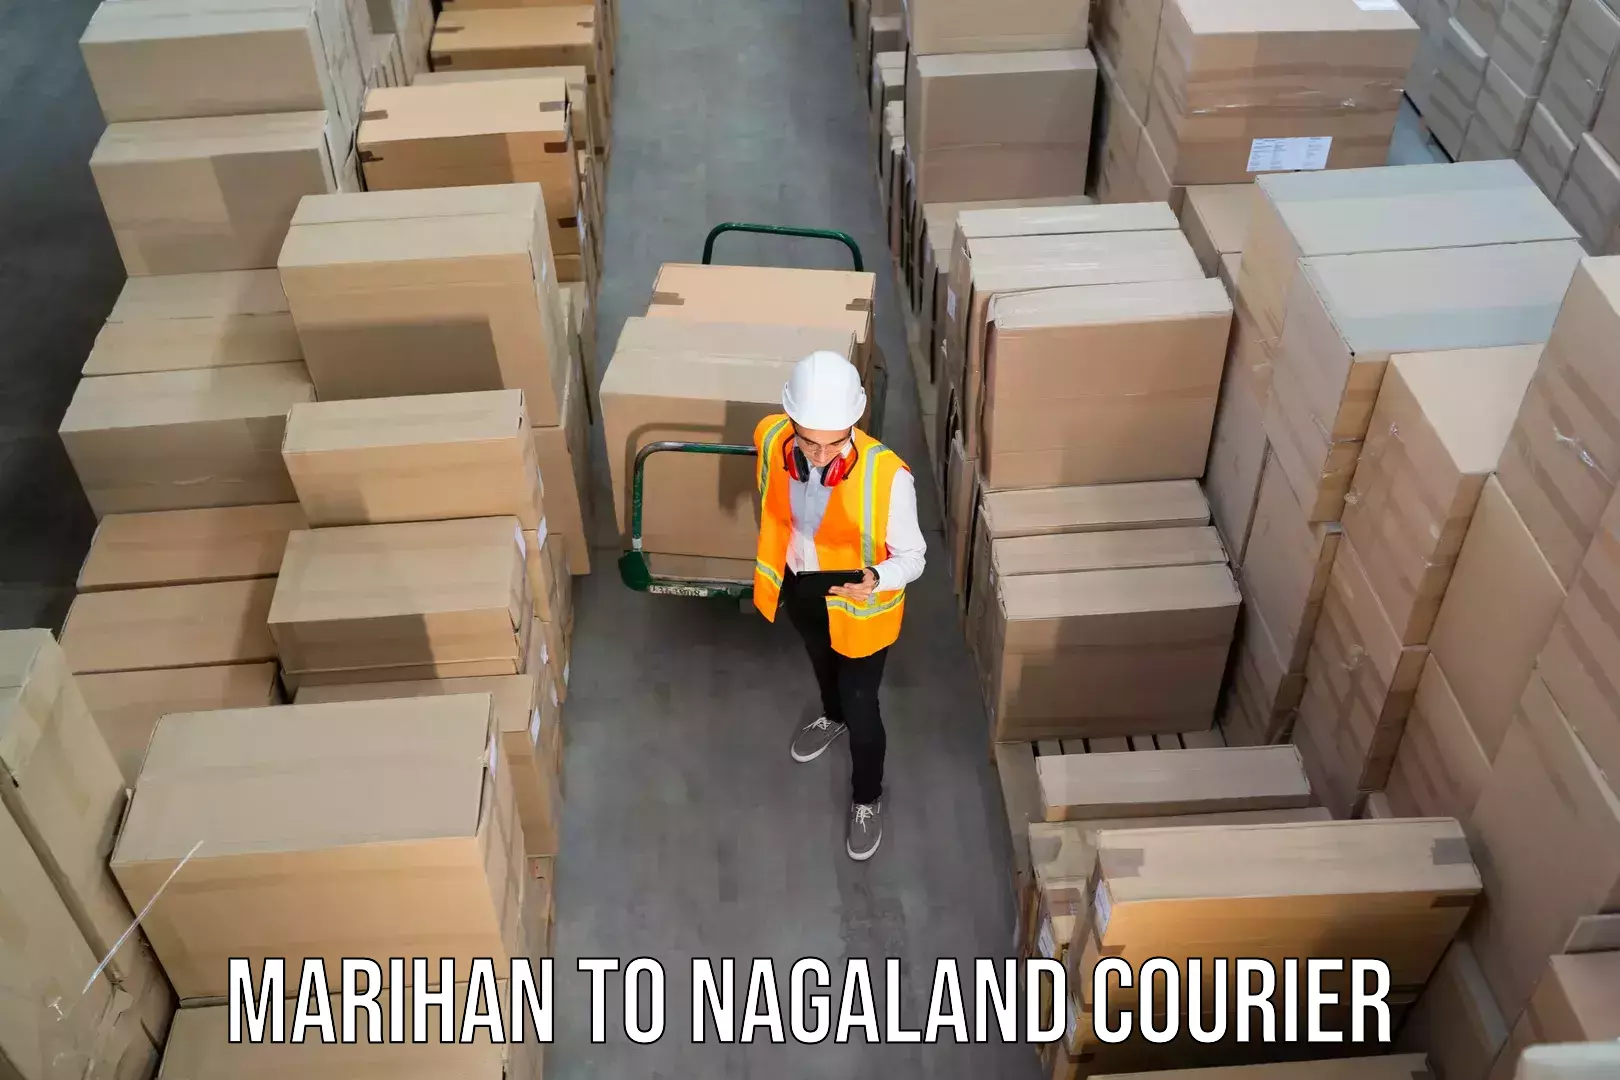 Business delivery service Marihan to Nagaland